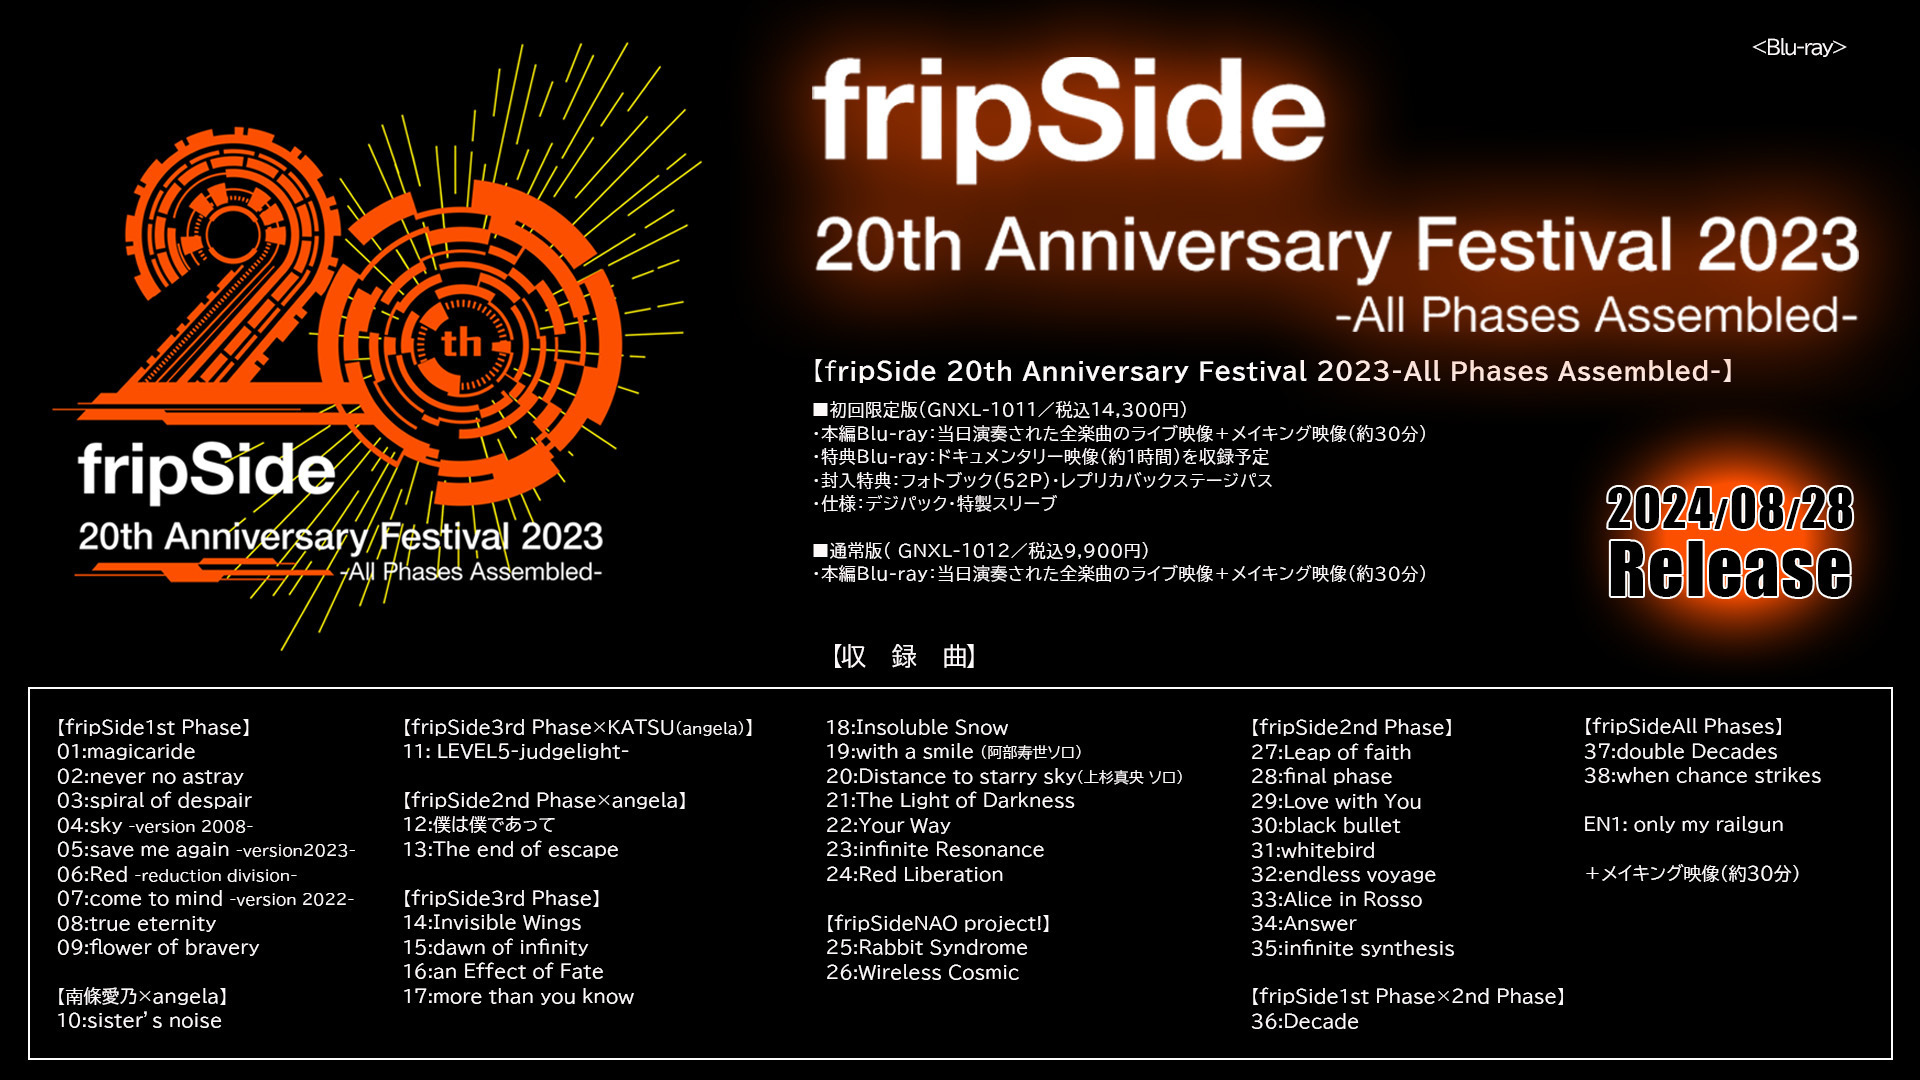 Blu-ray】fripSide20th Anniversary Festival 2023-All Phases  Assembled-」リリースのご案内 | fripSide OFFICIAL SITE